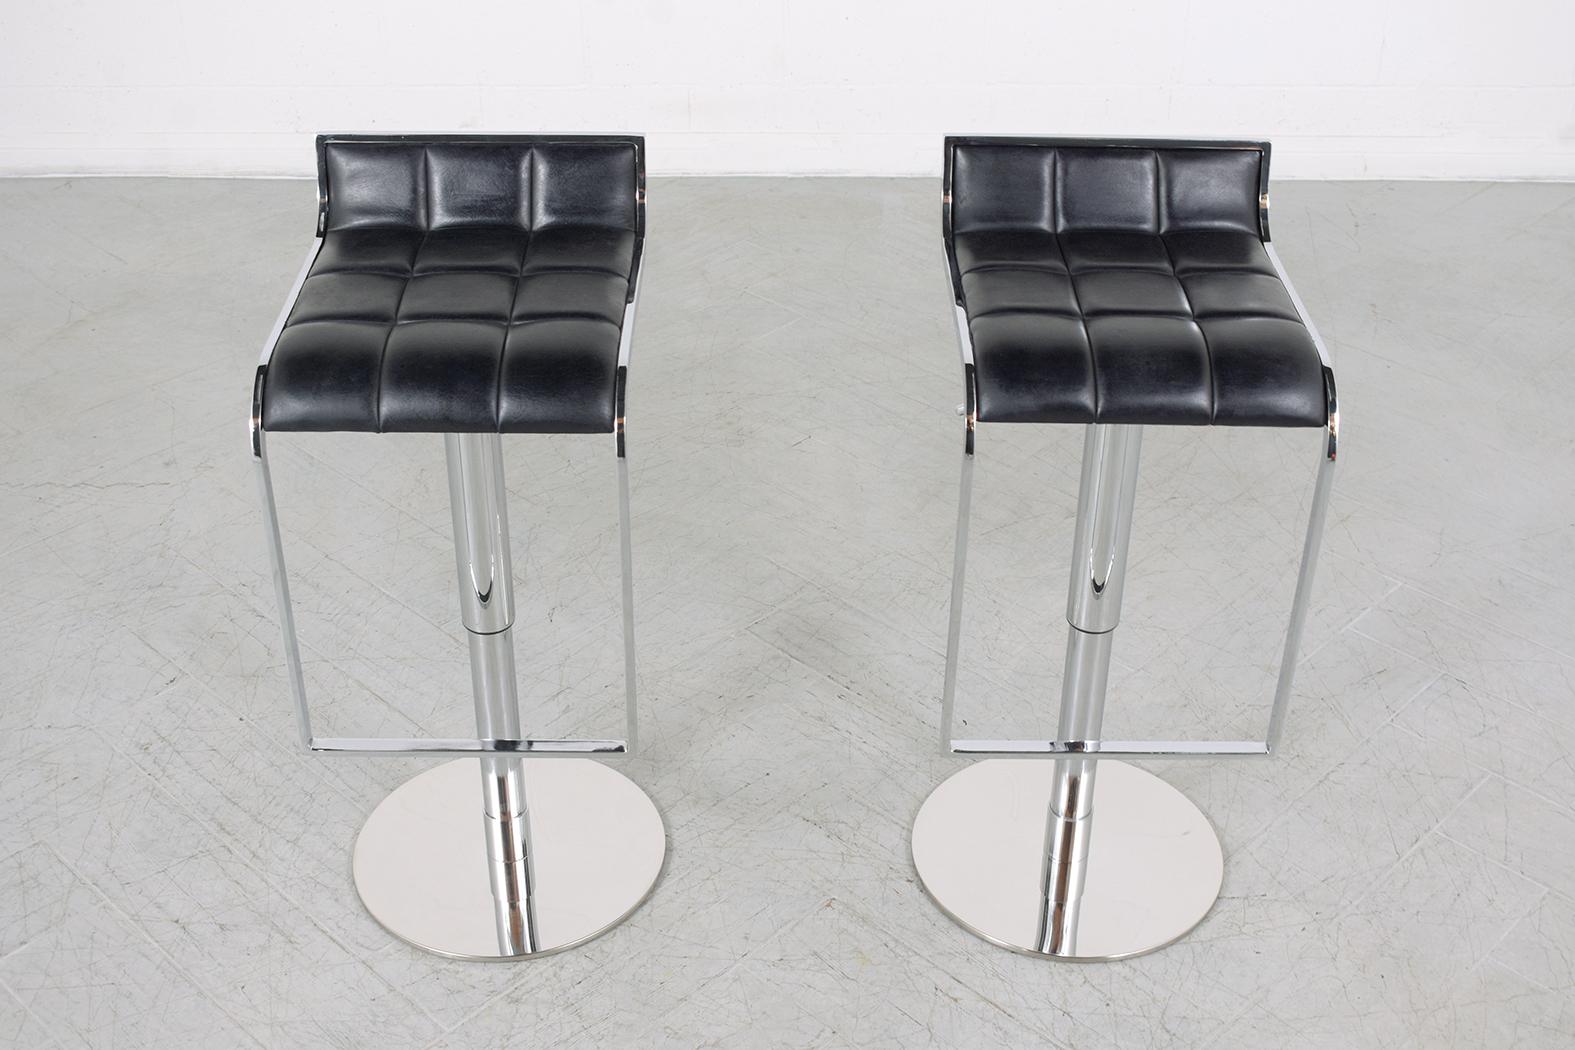 American Vintage Mid-Century Modern Chrome Barstools with Black Leather Seats For Sale